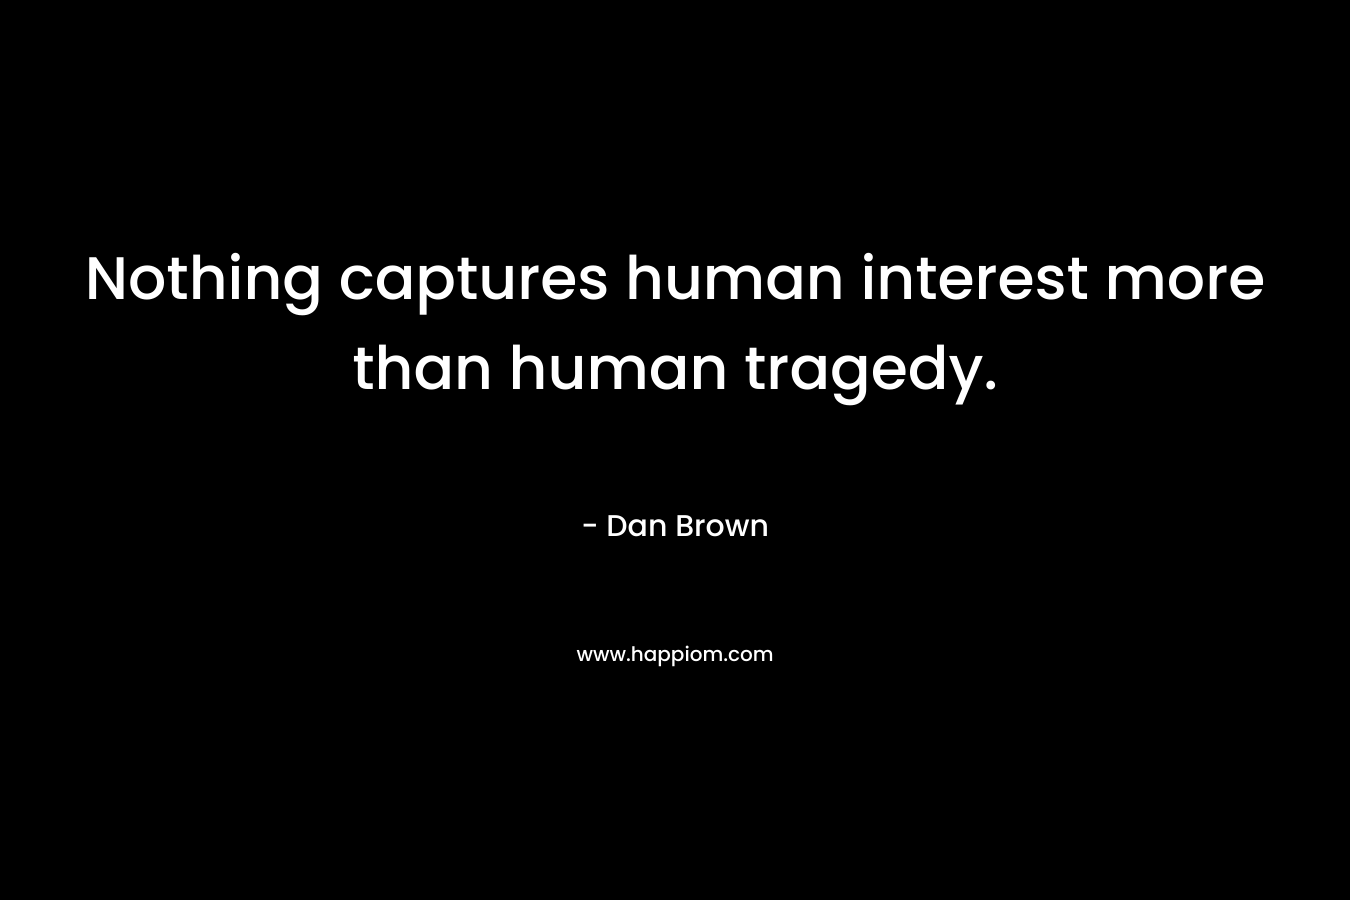 Nothing captures human interest more than human tragedy. – Dan Brown